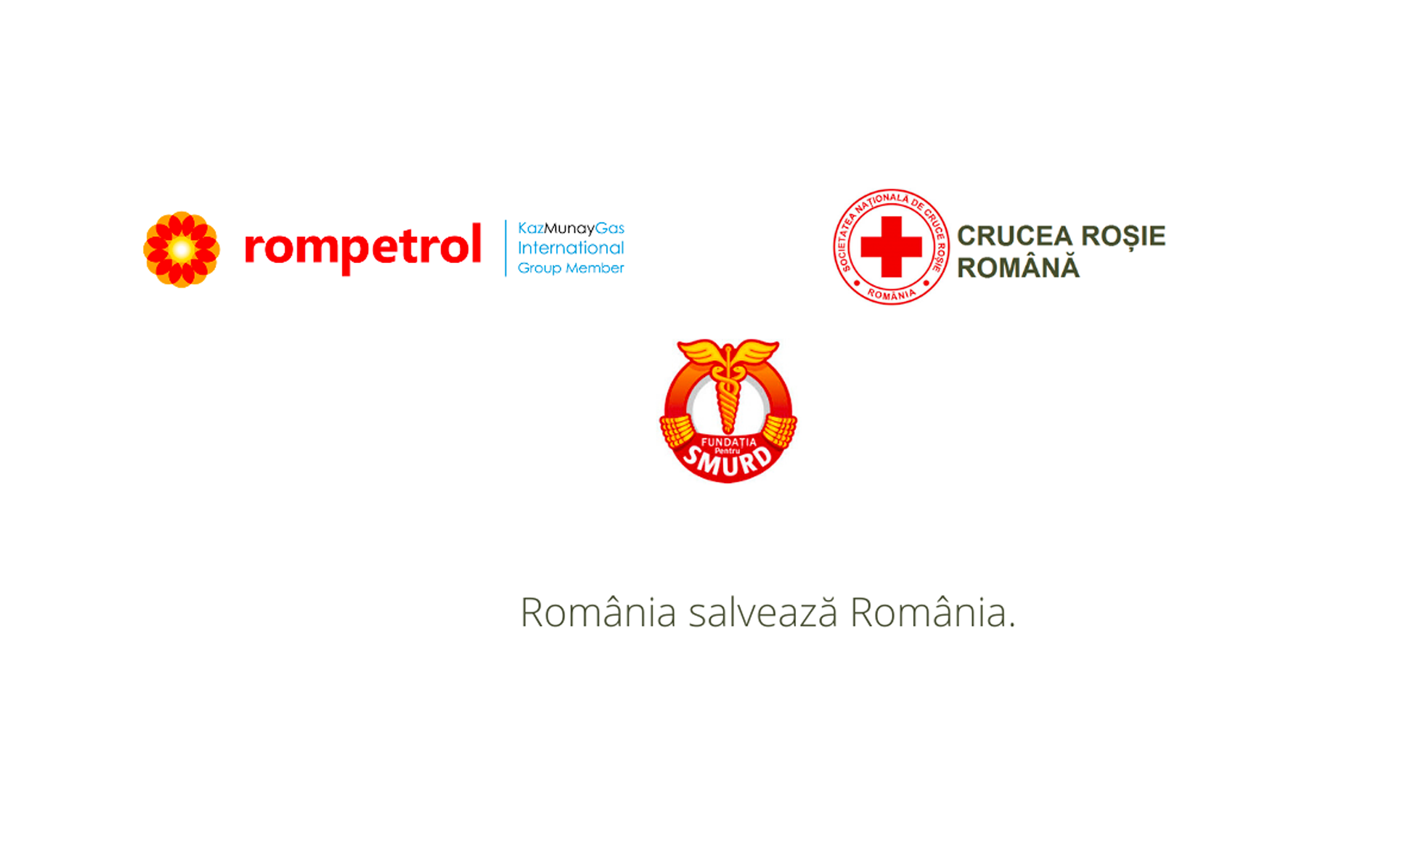 Rompetrol continues to supports the healthcare system in Romania 